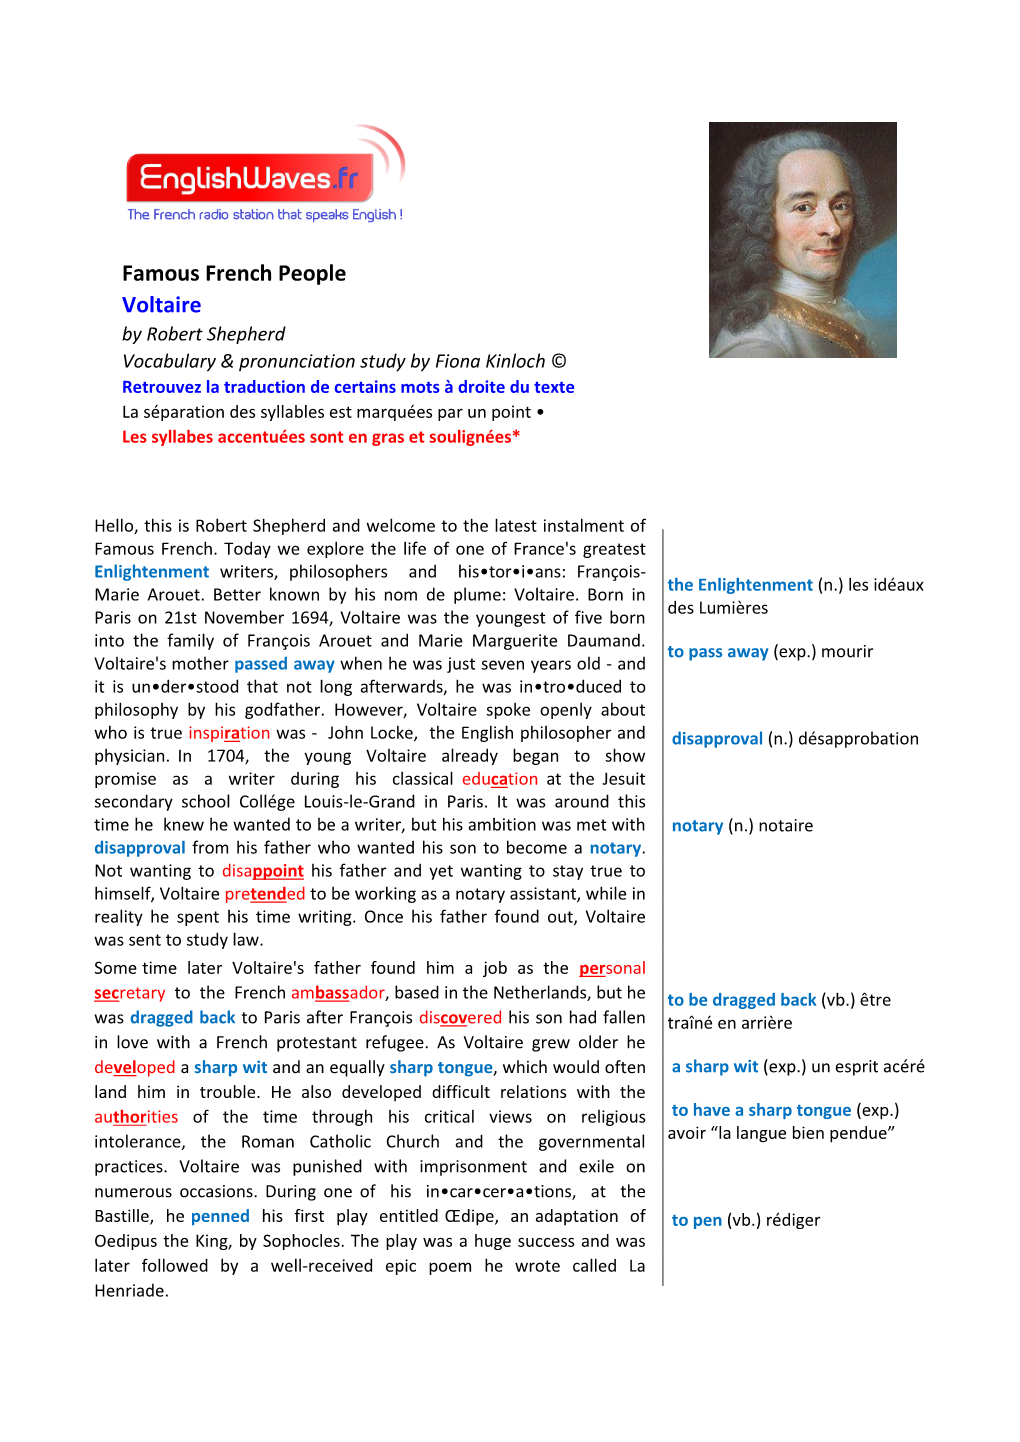 Famous French People Voltaire